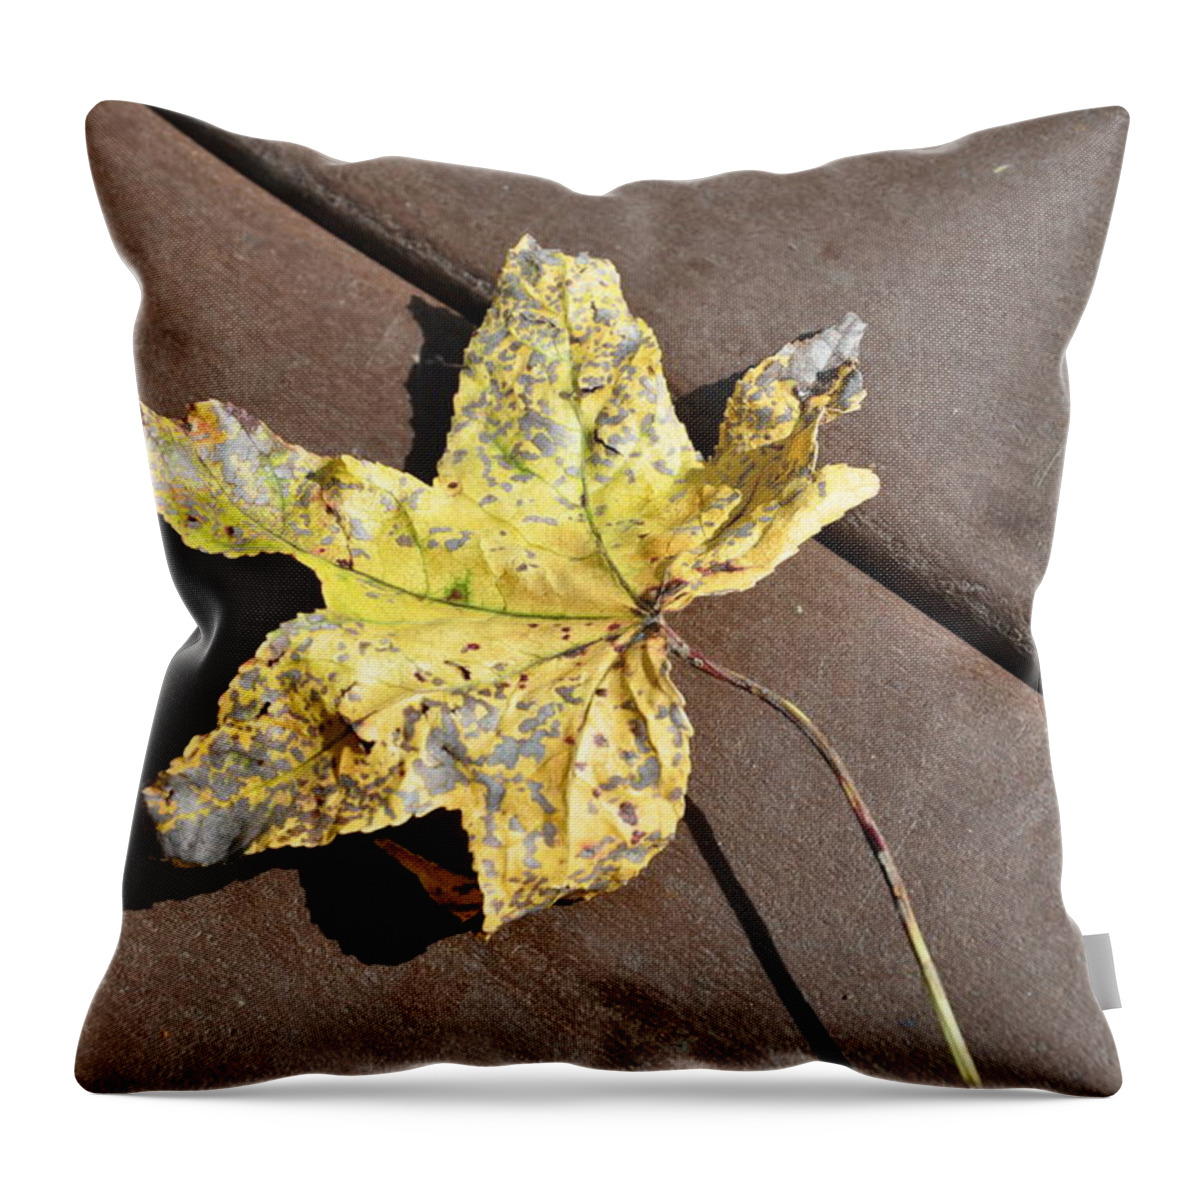 Gold Throw Pillow featuring the photograph Gold Leaf by Frank Madia